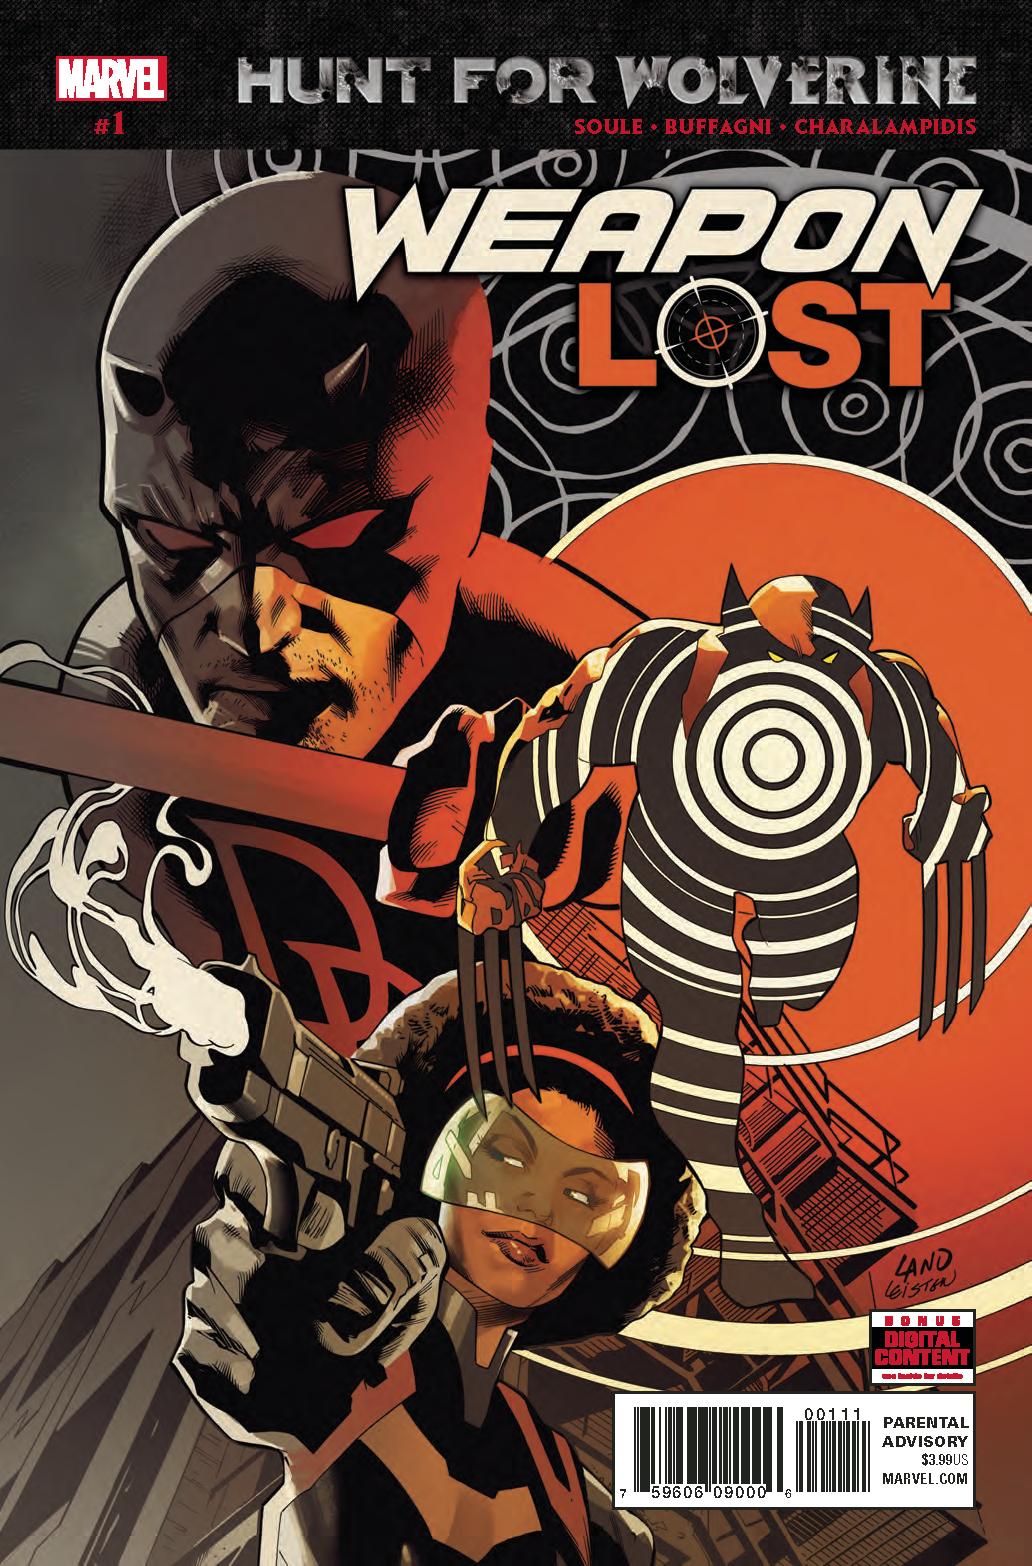 HUNT FOR WOLVERINE WEAPON LOST #1 (OF 4)